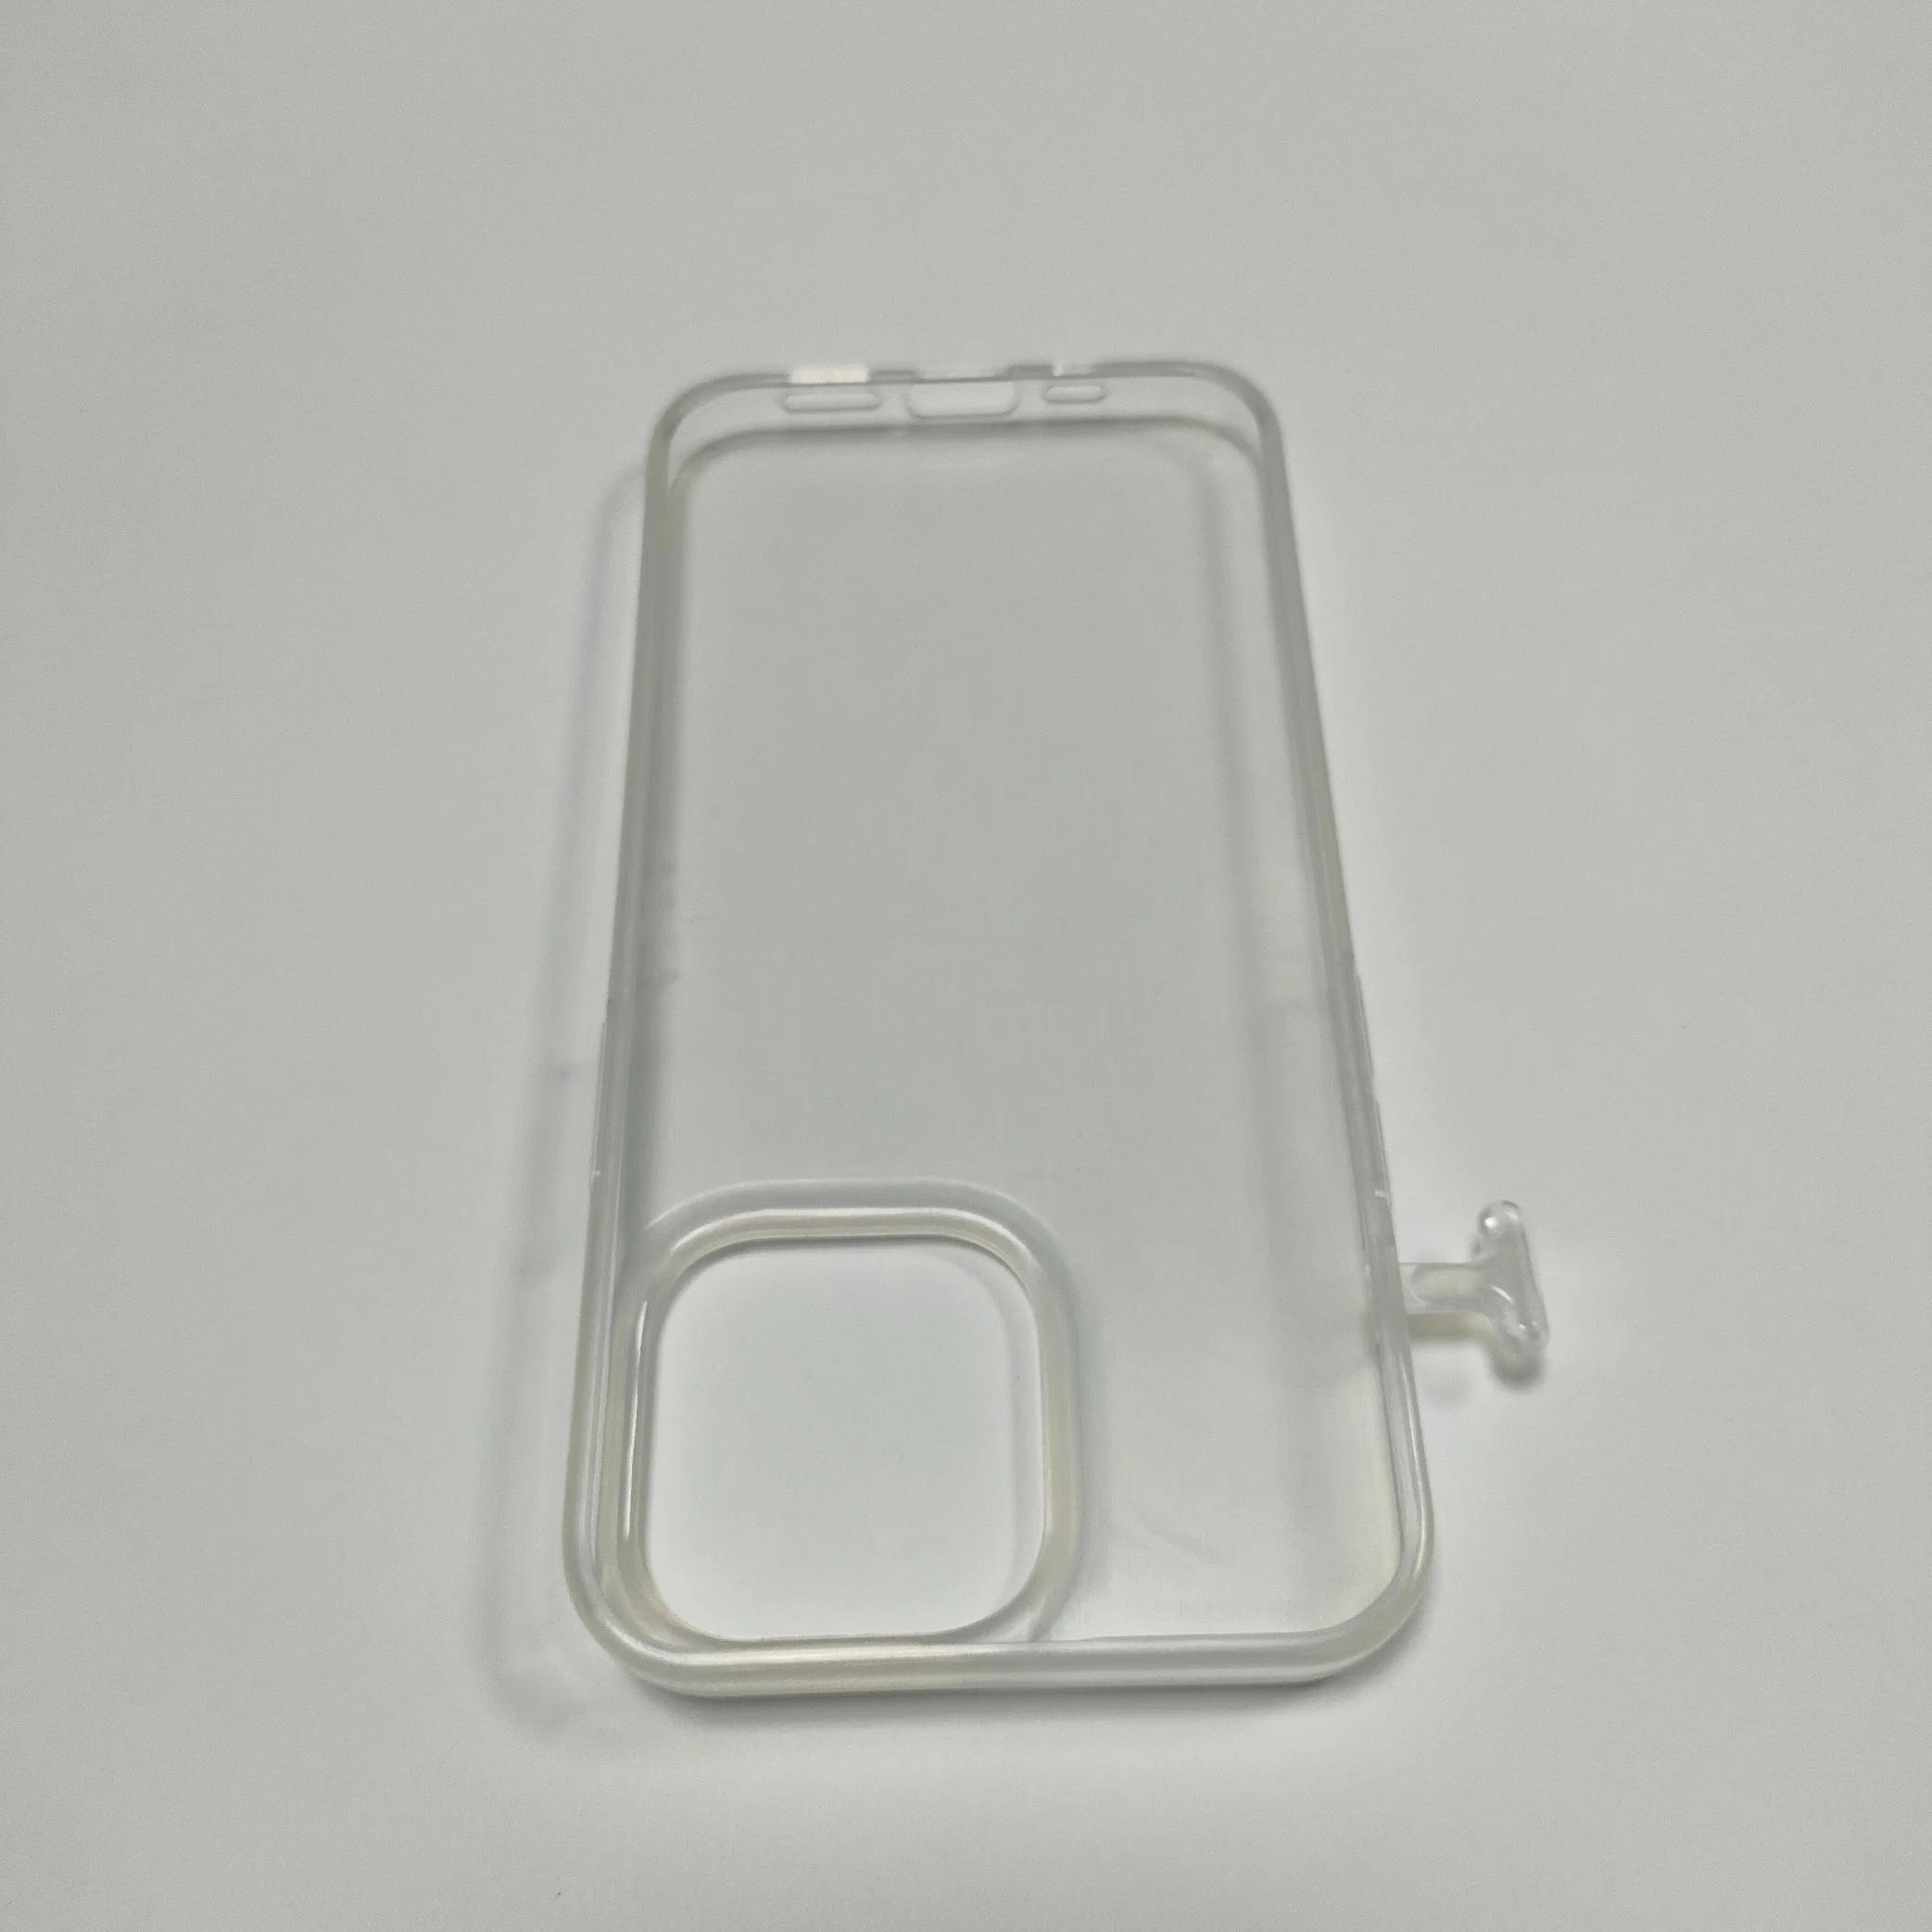 OEM TPU Material Plastic Mobile Phone Case Injection Mould